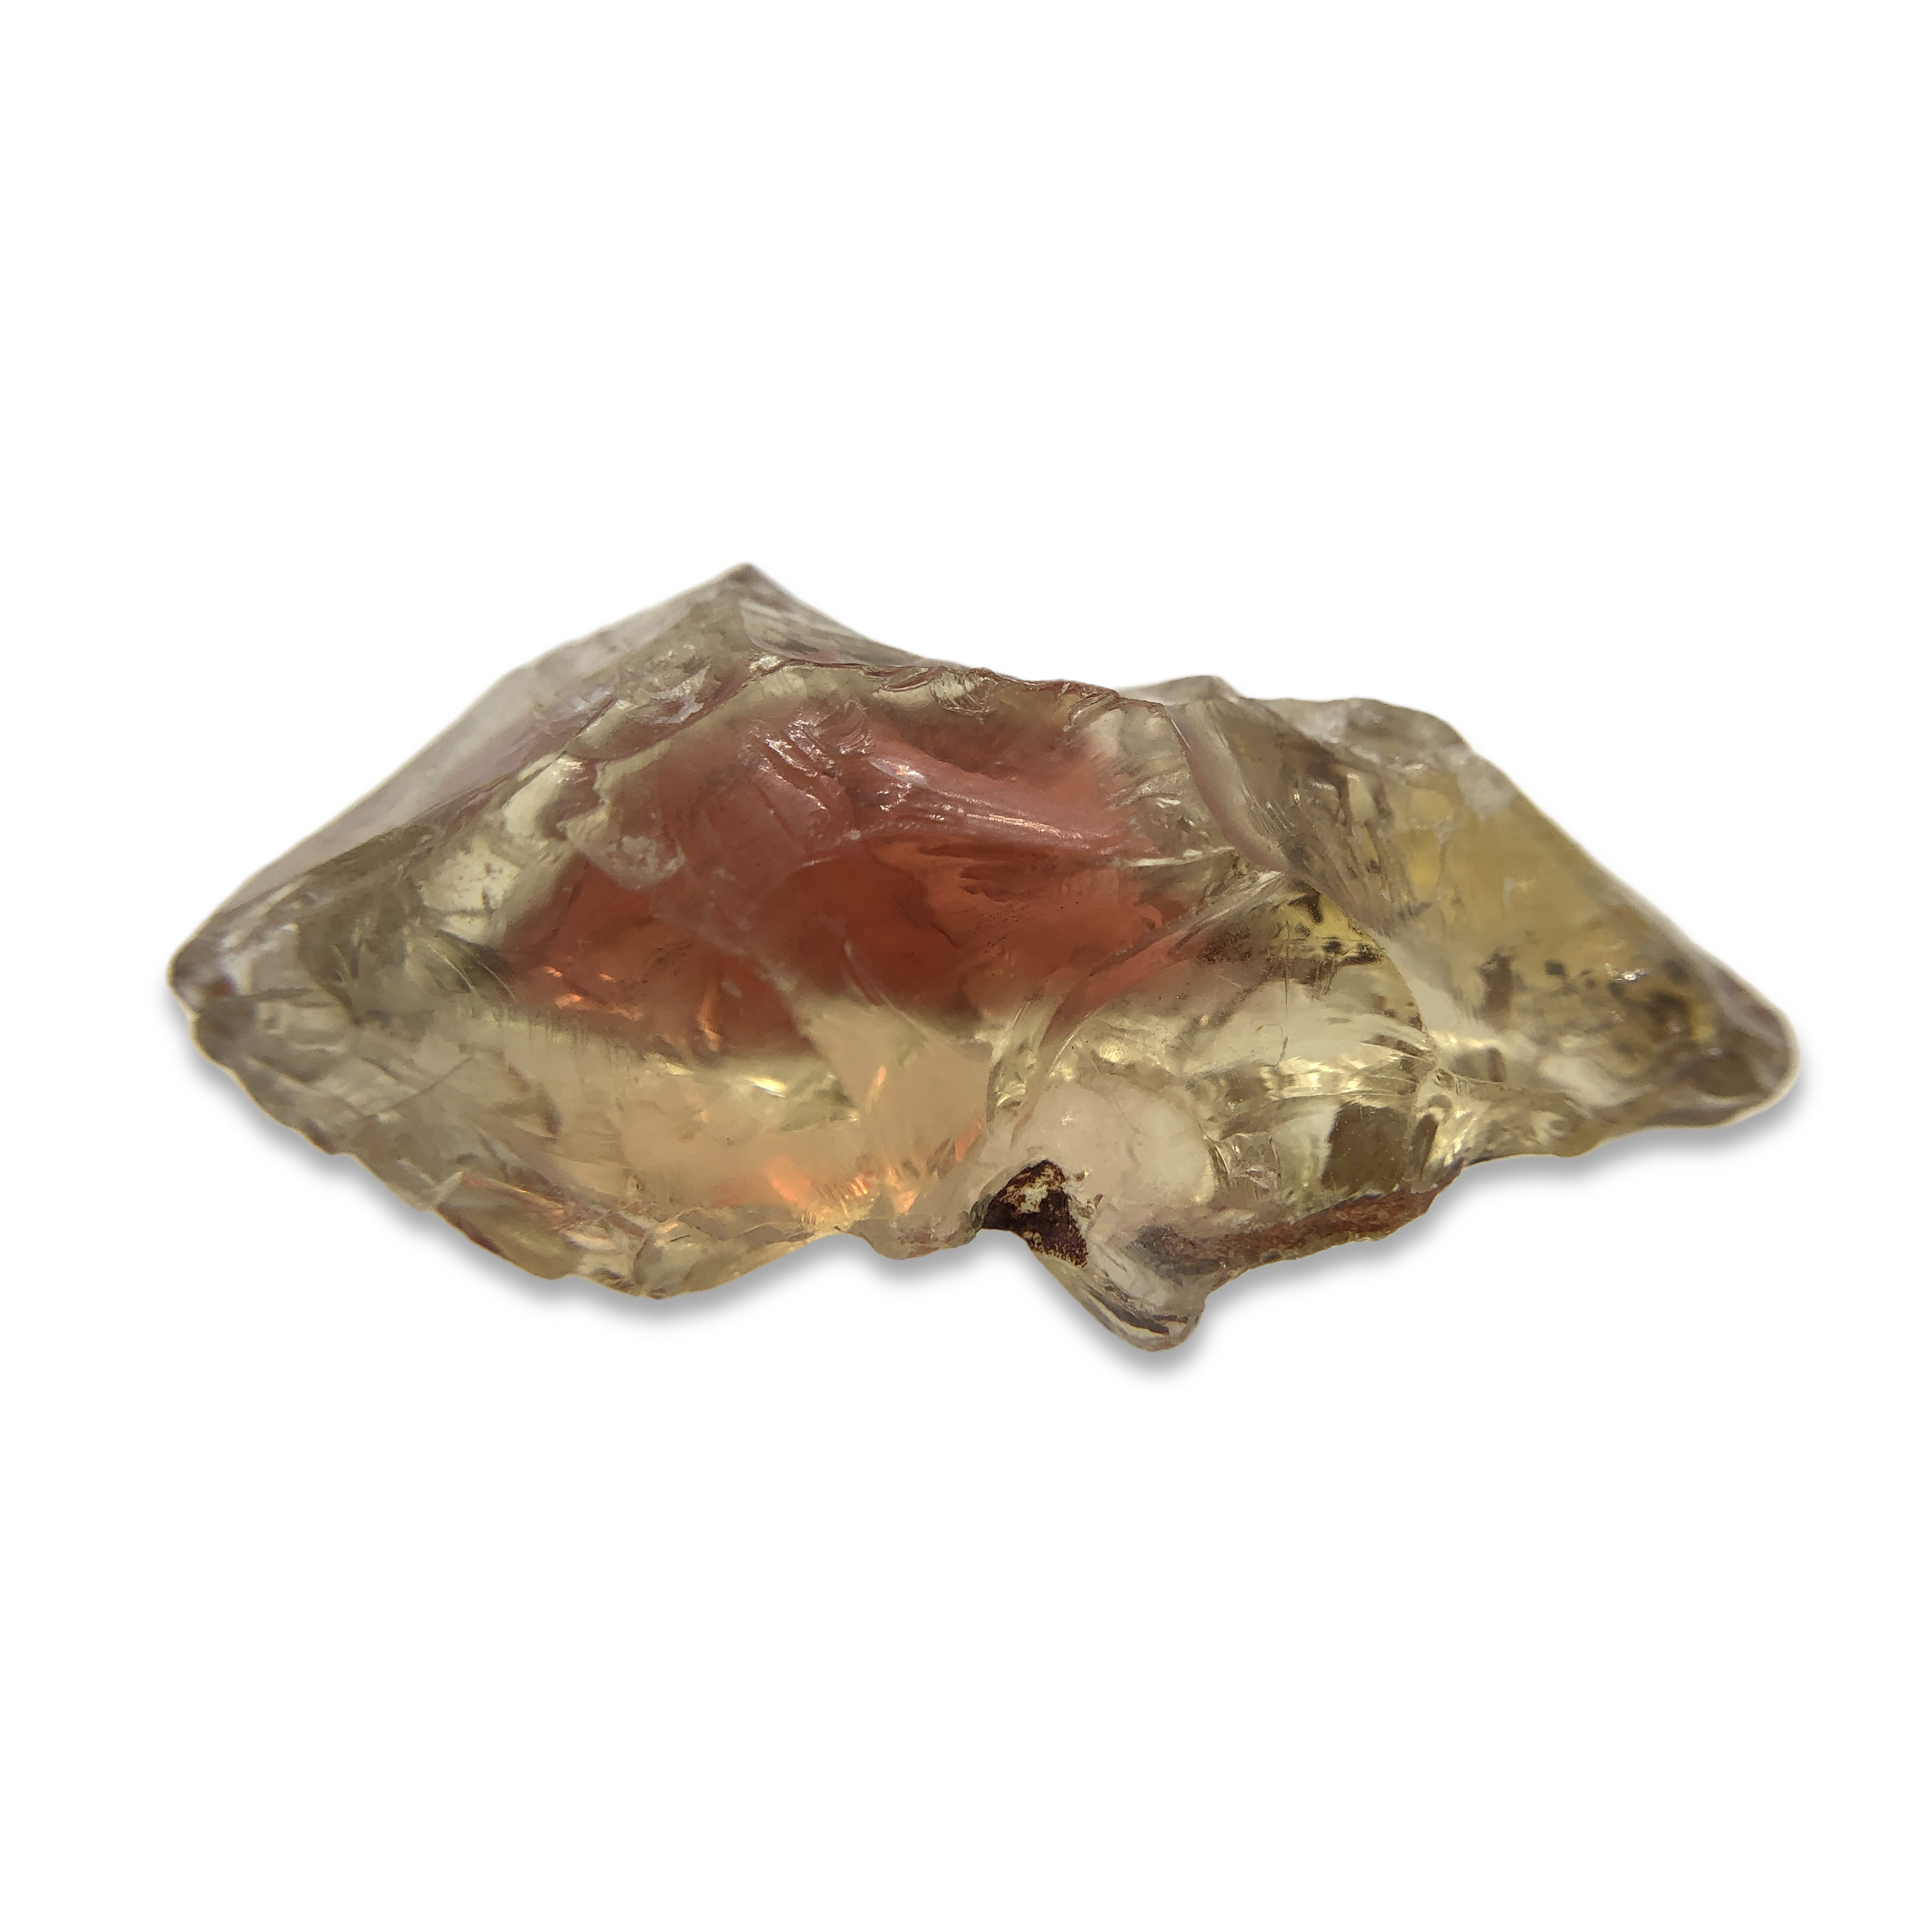 Rough Oregon Sunstone from the United States - 27.2 CTW